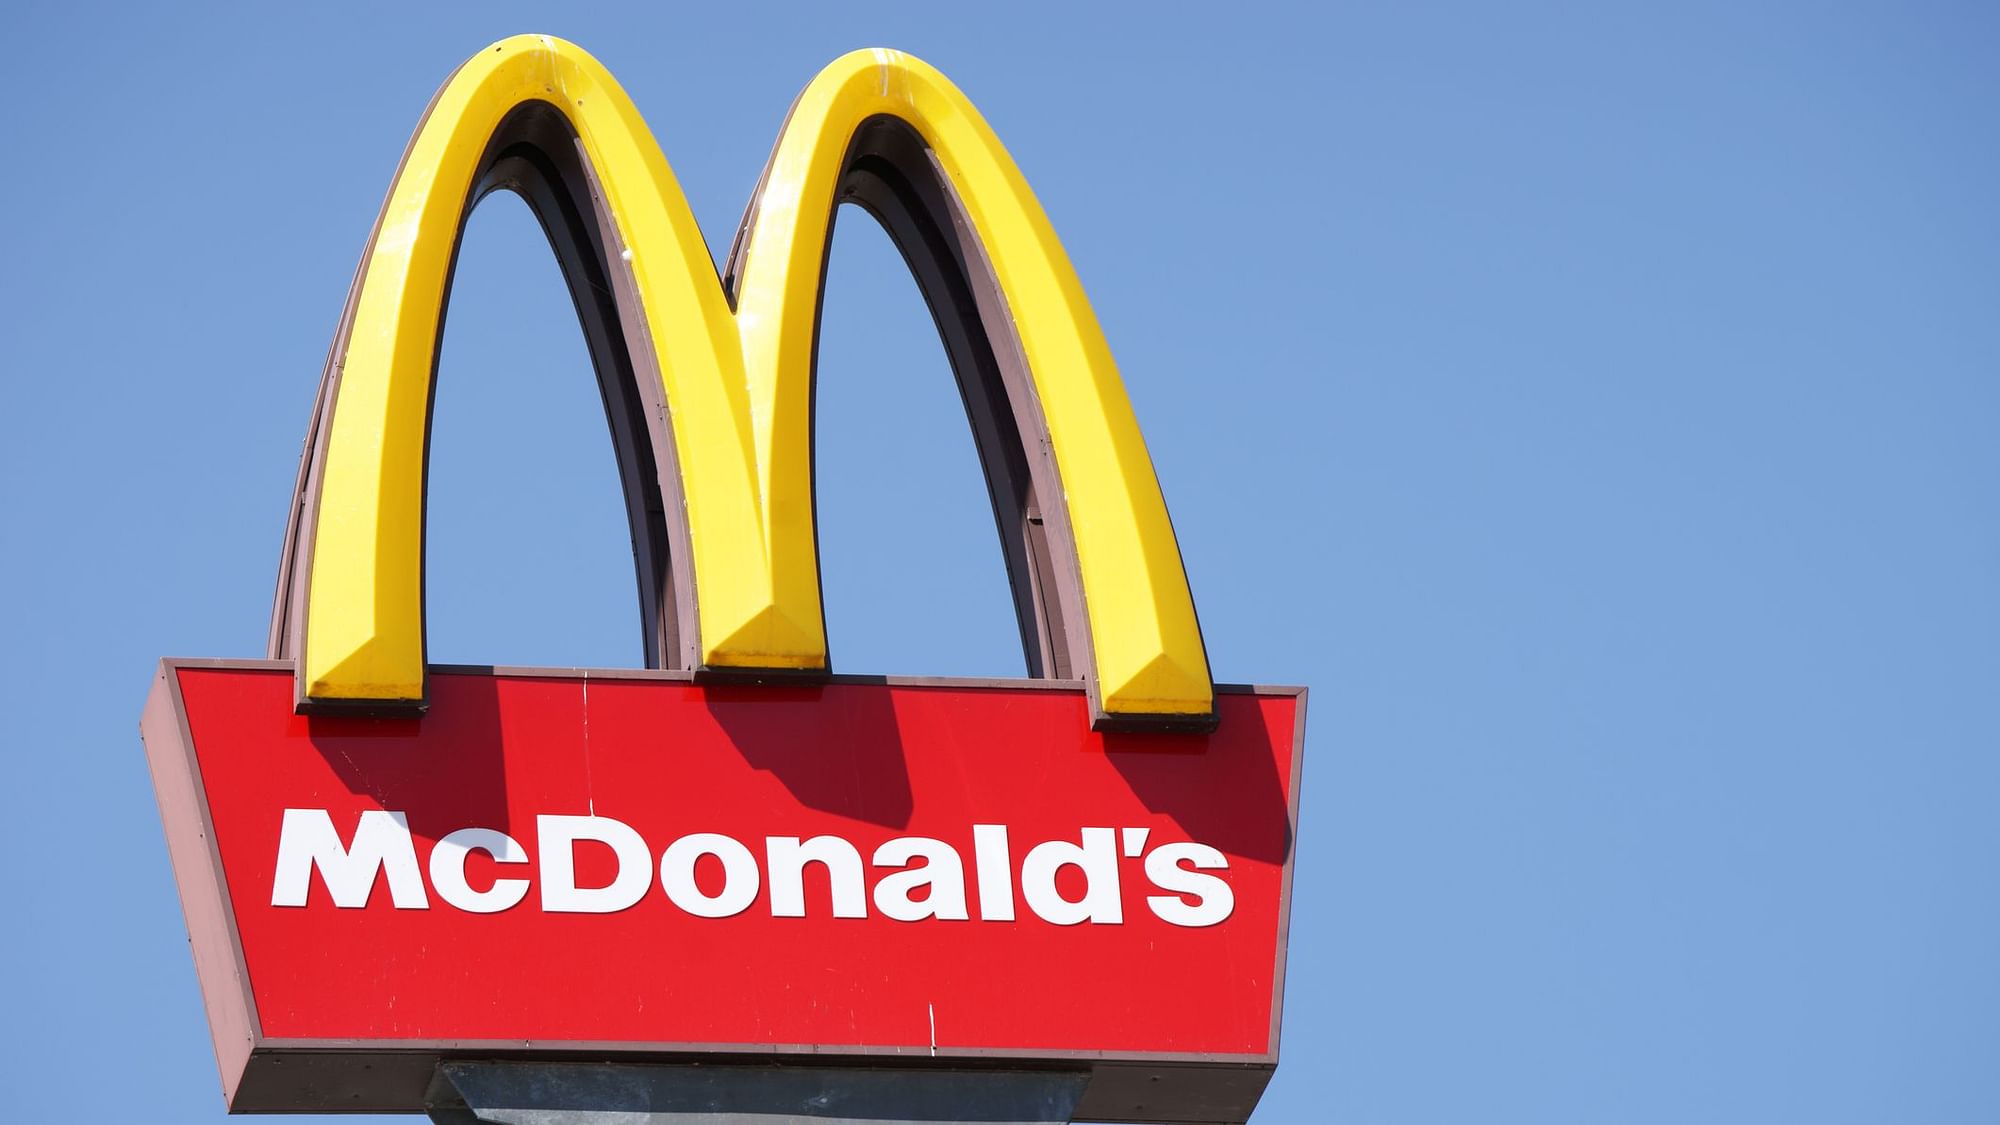 McDonald&apos;s, the burger chain, was called out for making fun of vegetables.